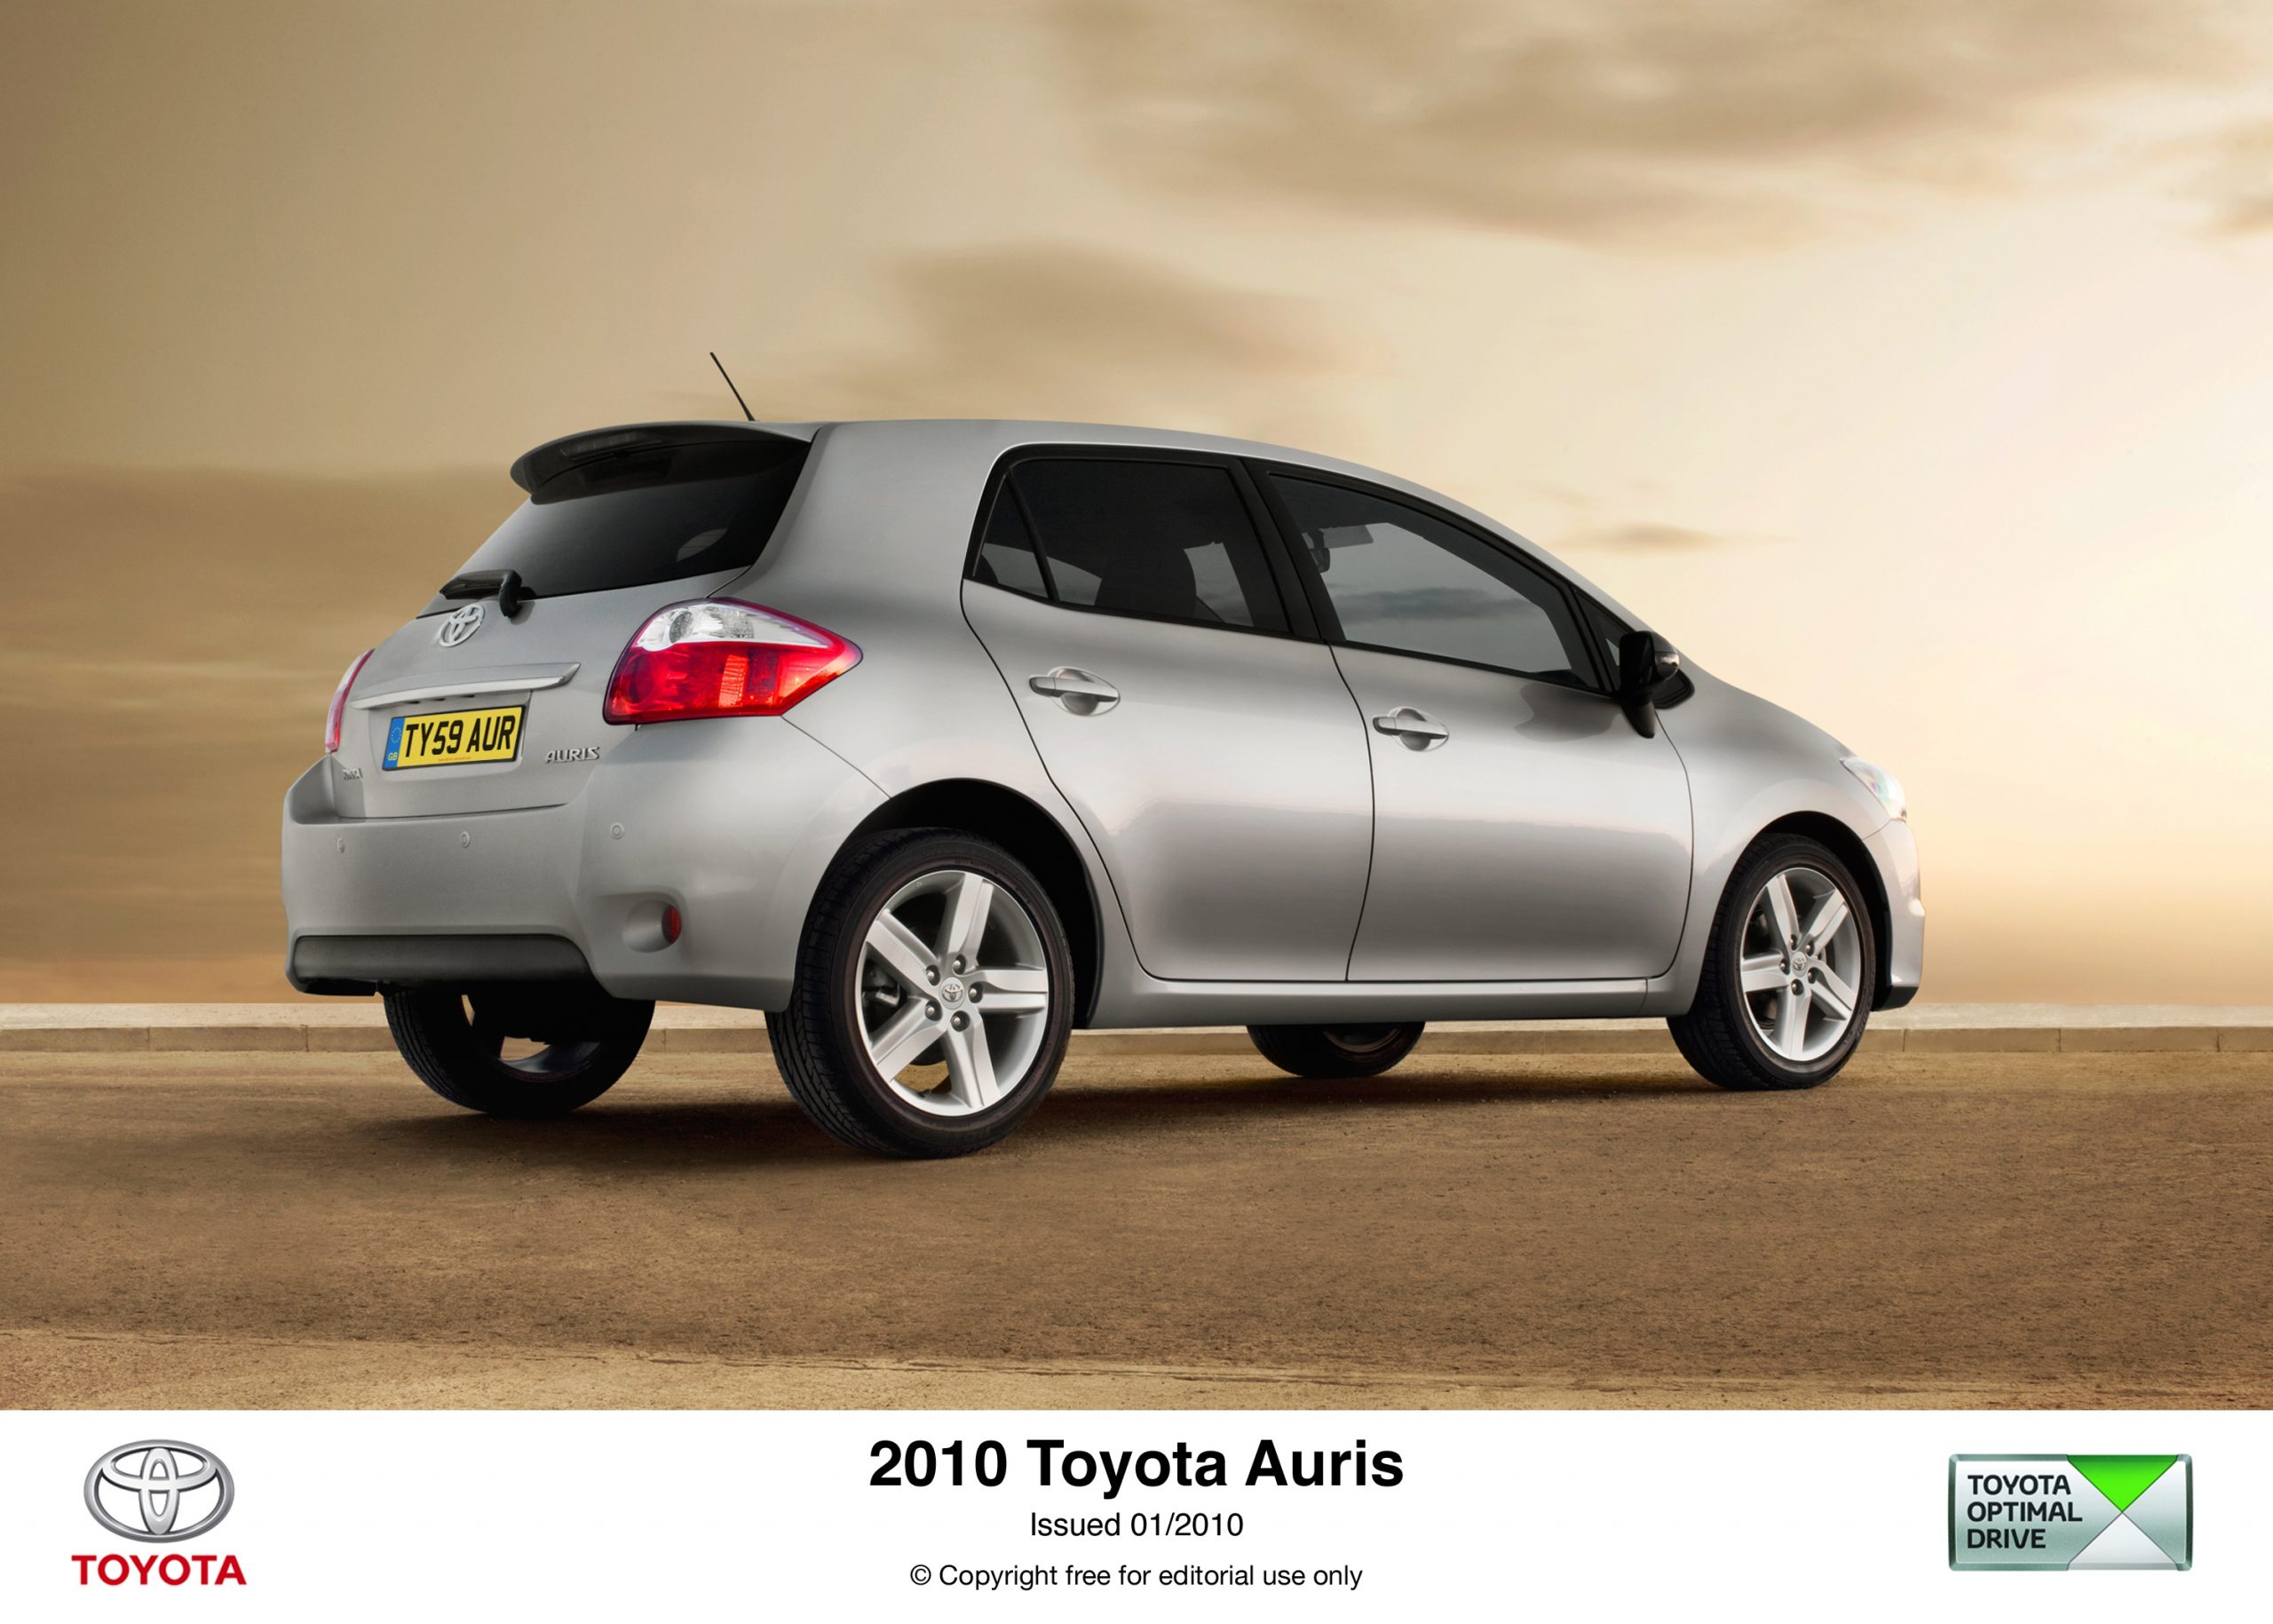 Toyota Auris prices and specs confirmed